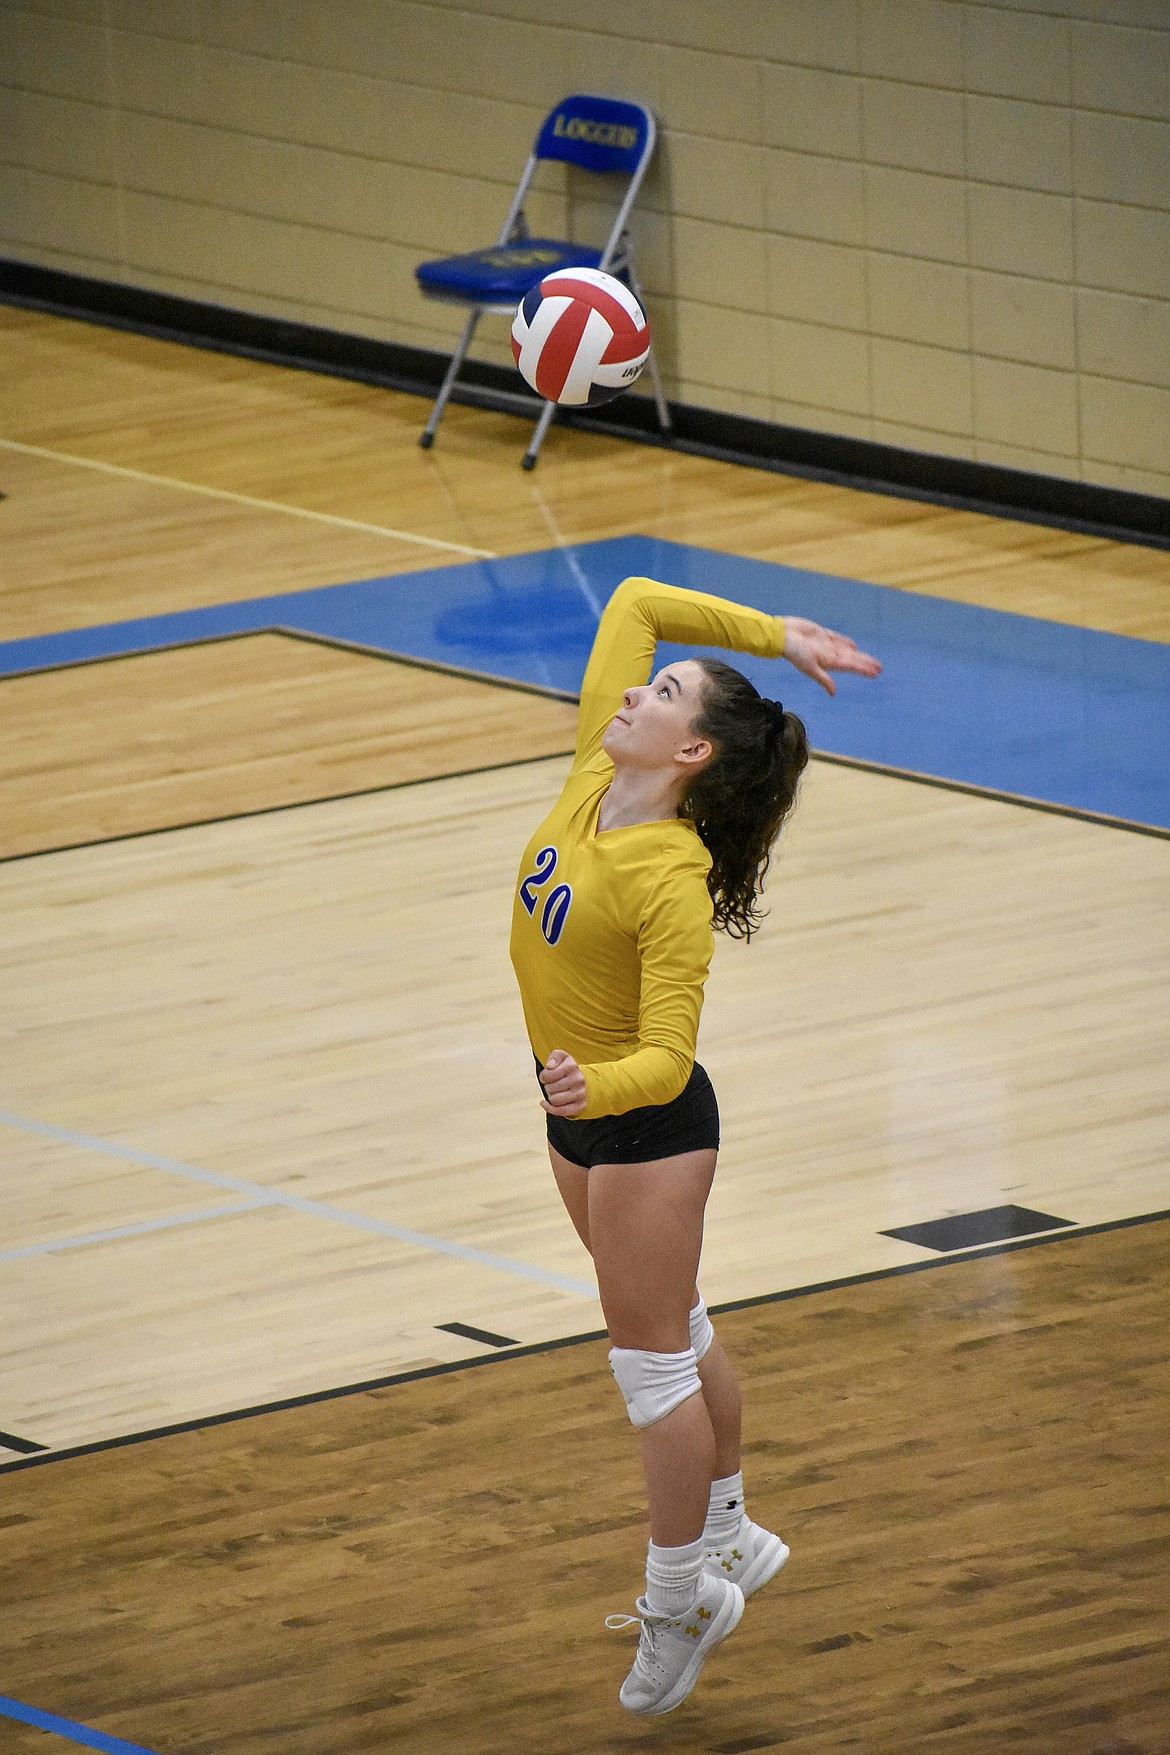 Libby senior Emma Gruber serves during the Lady Loggers&#146; three-set win against Ronan Saturday. Gruber was one of four Libby players with 100 percent serving. (Ben Kibbey/The Western News)